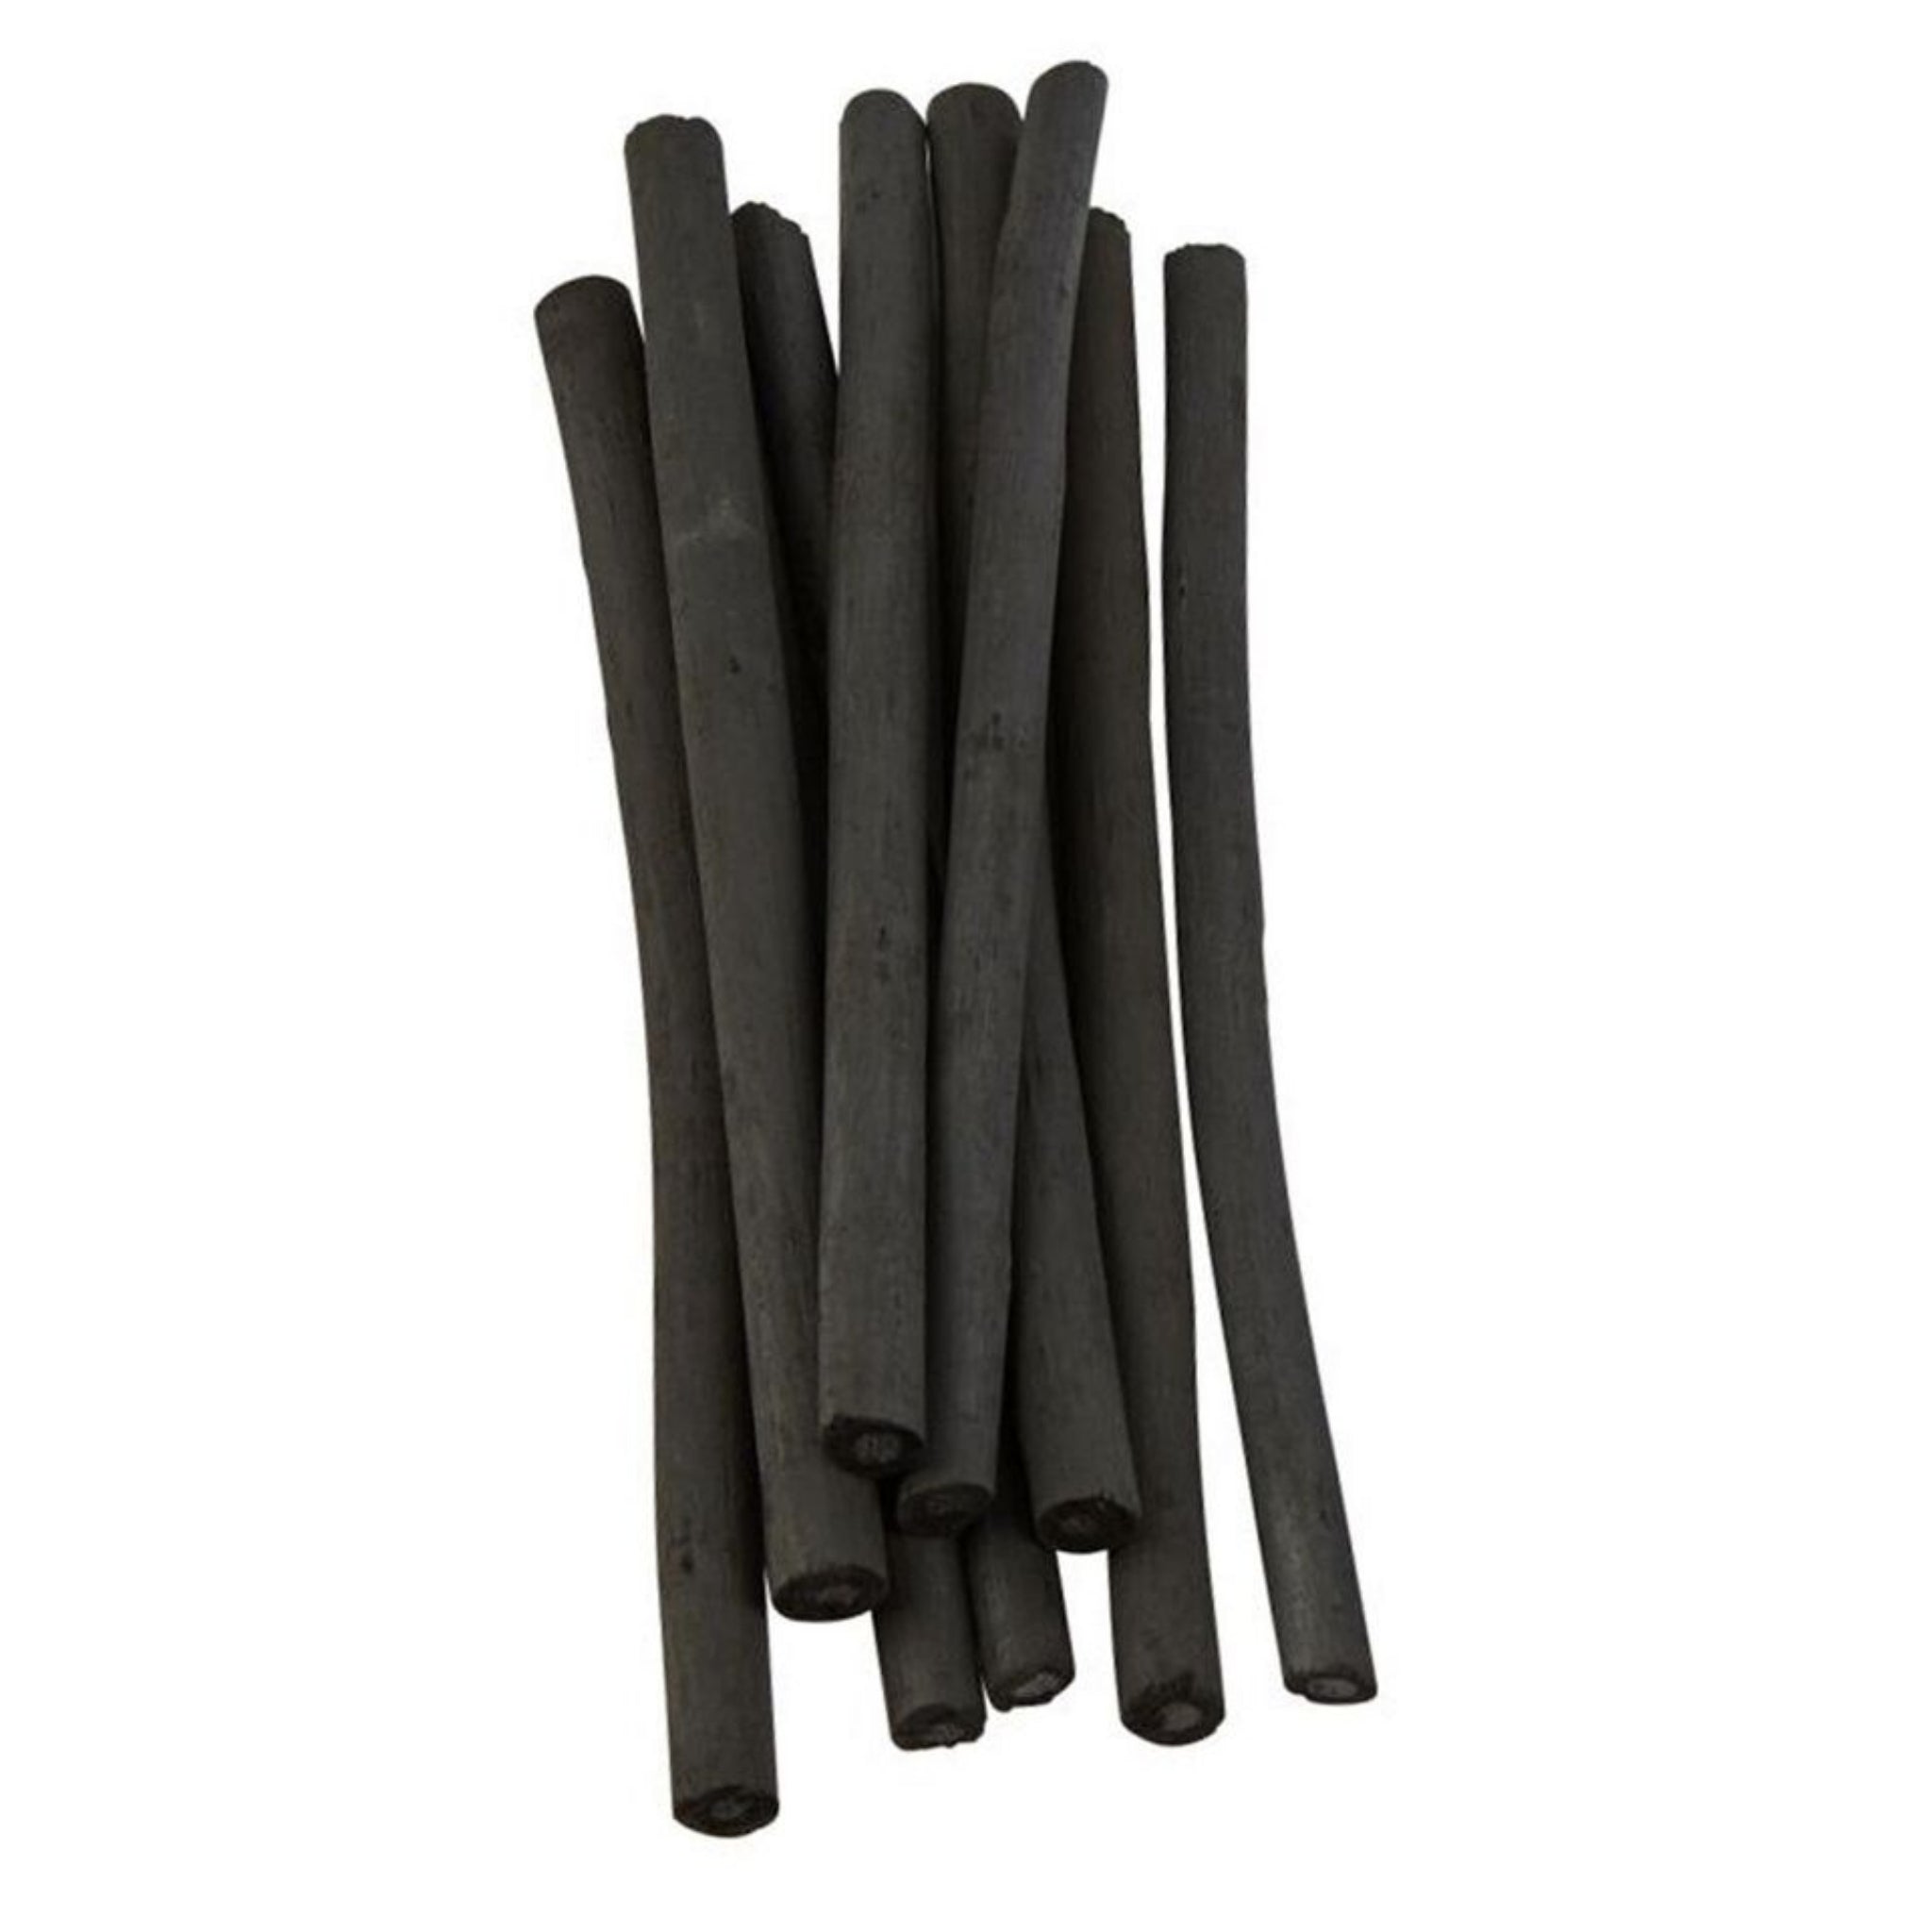 Beclen Harp 12 Assorted Willow Charcoal Sketch Drawing Natural Charcoal Sticks Drawing